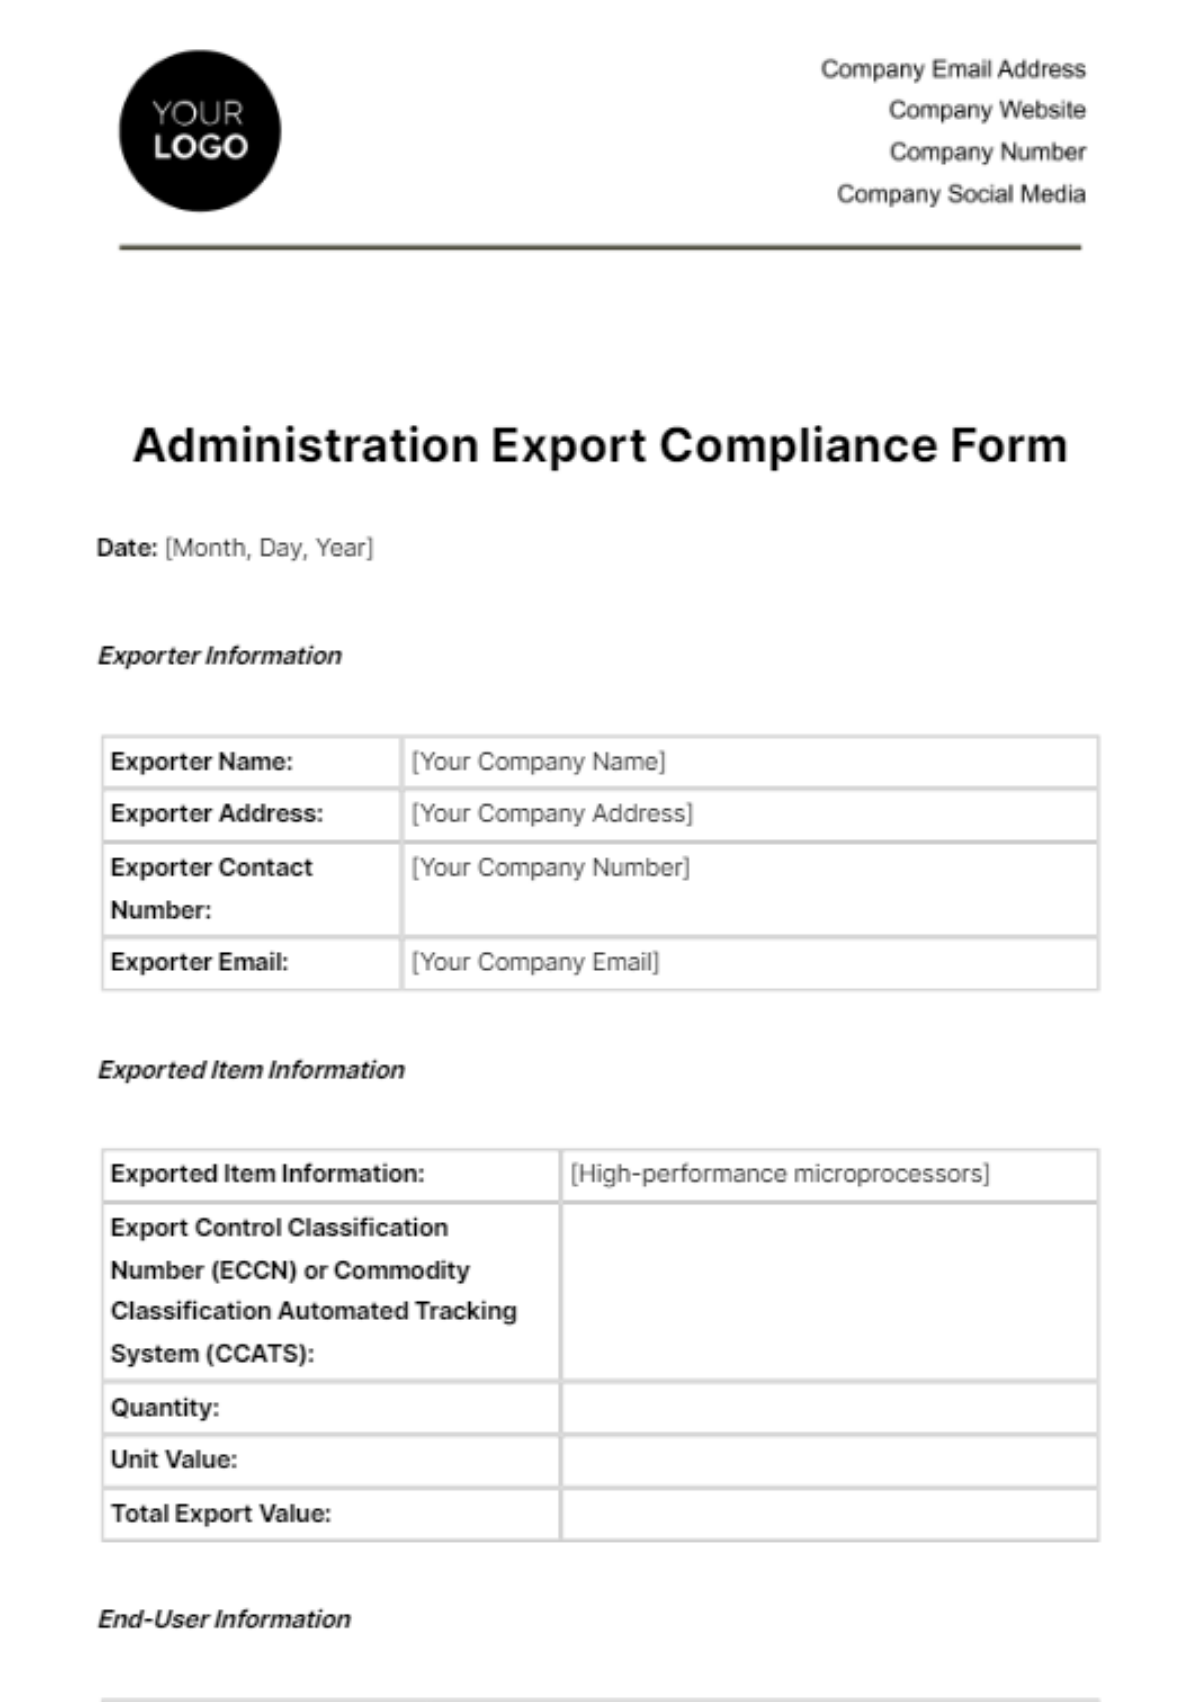 Free Administration Export Compliance Form Template